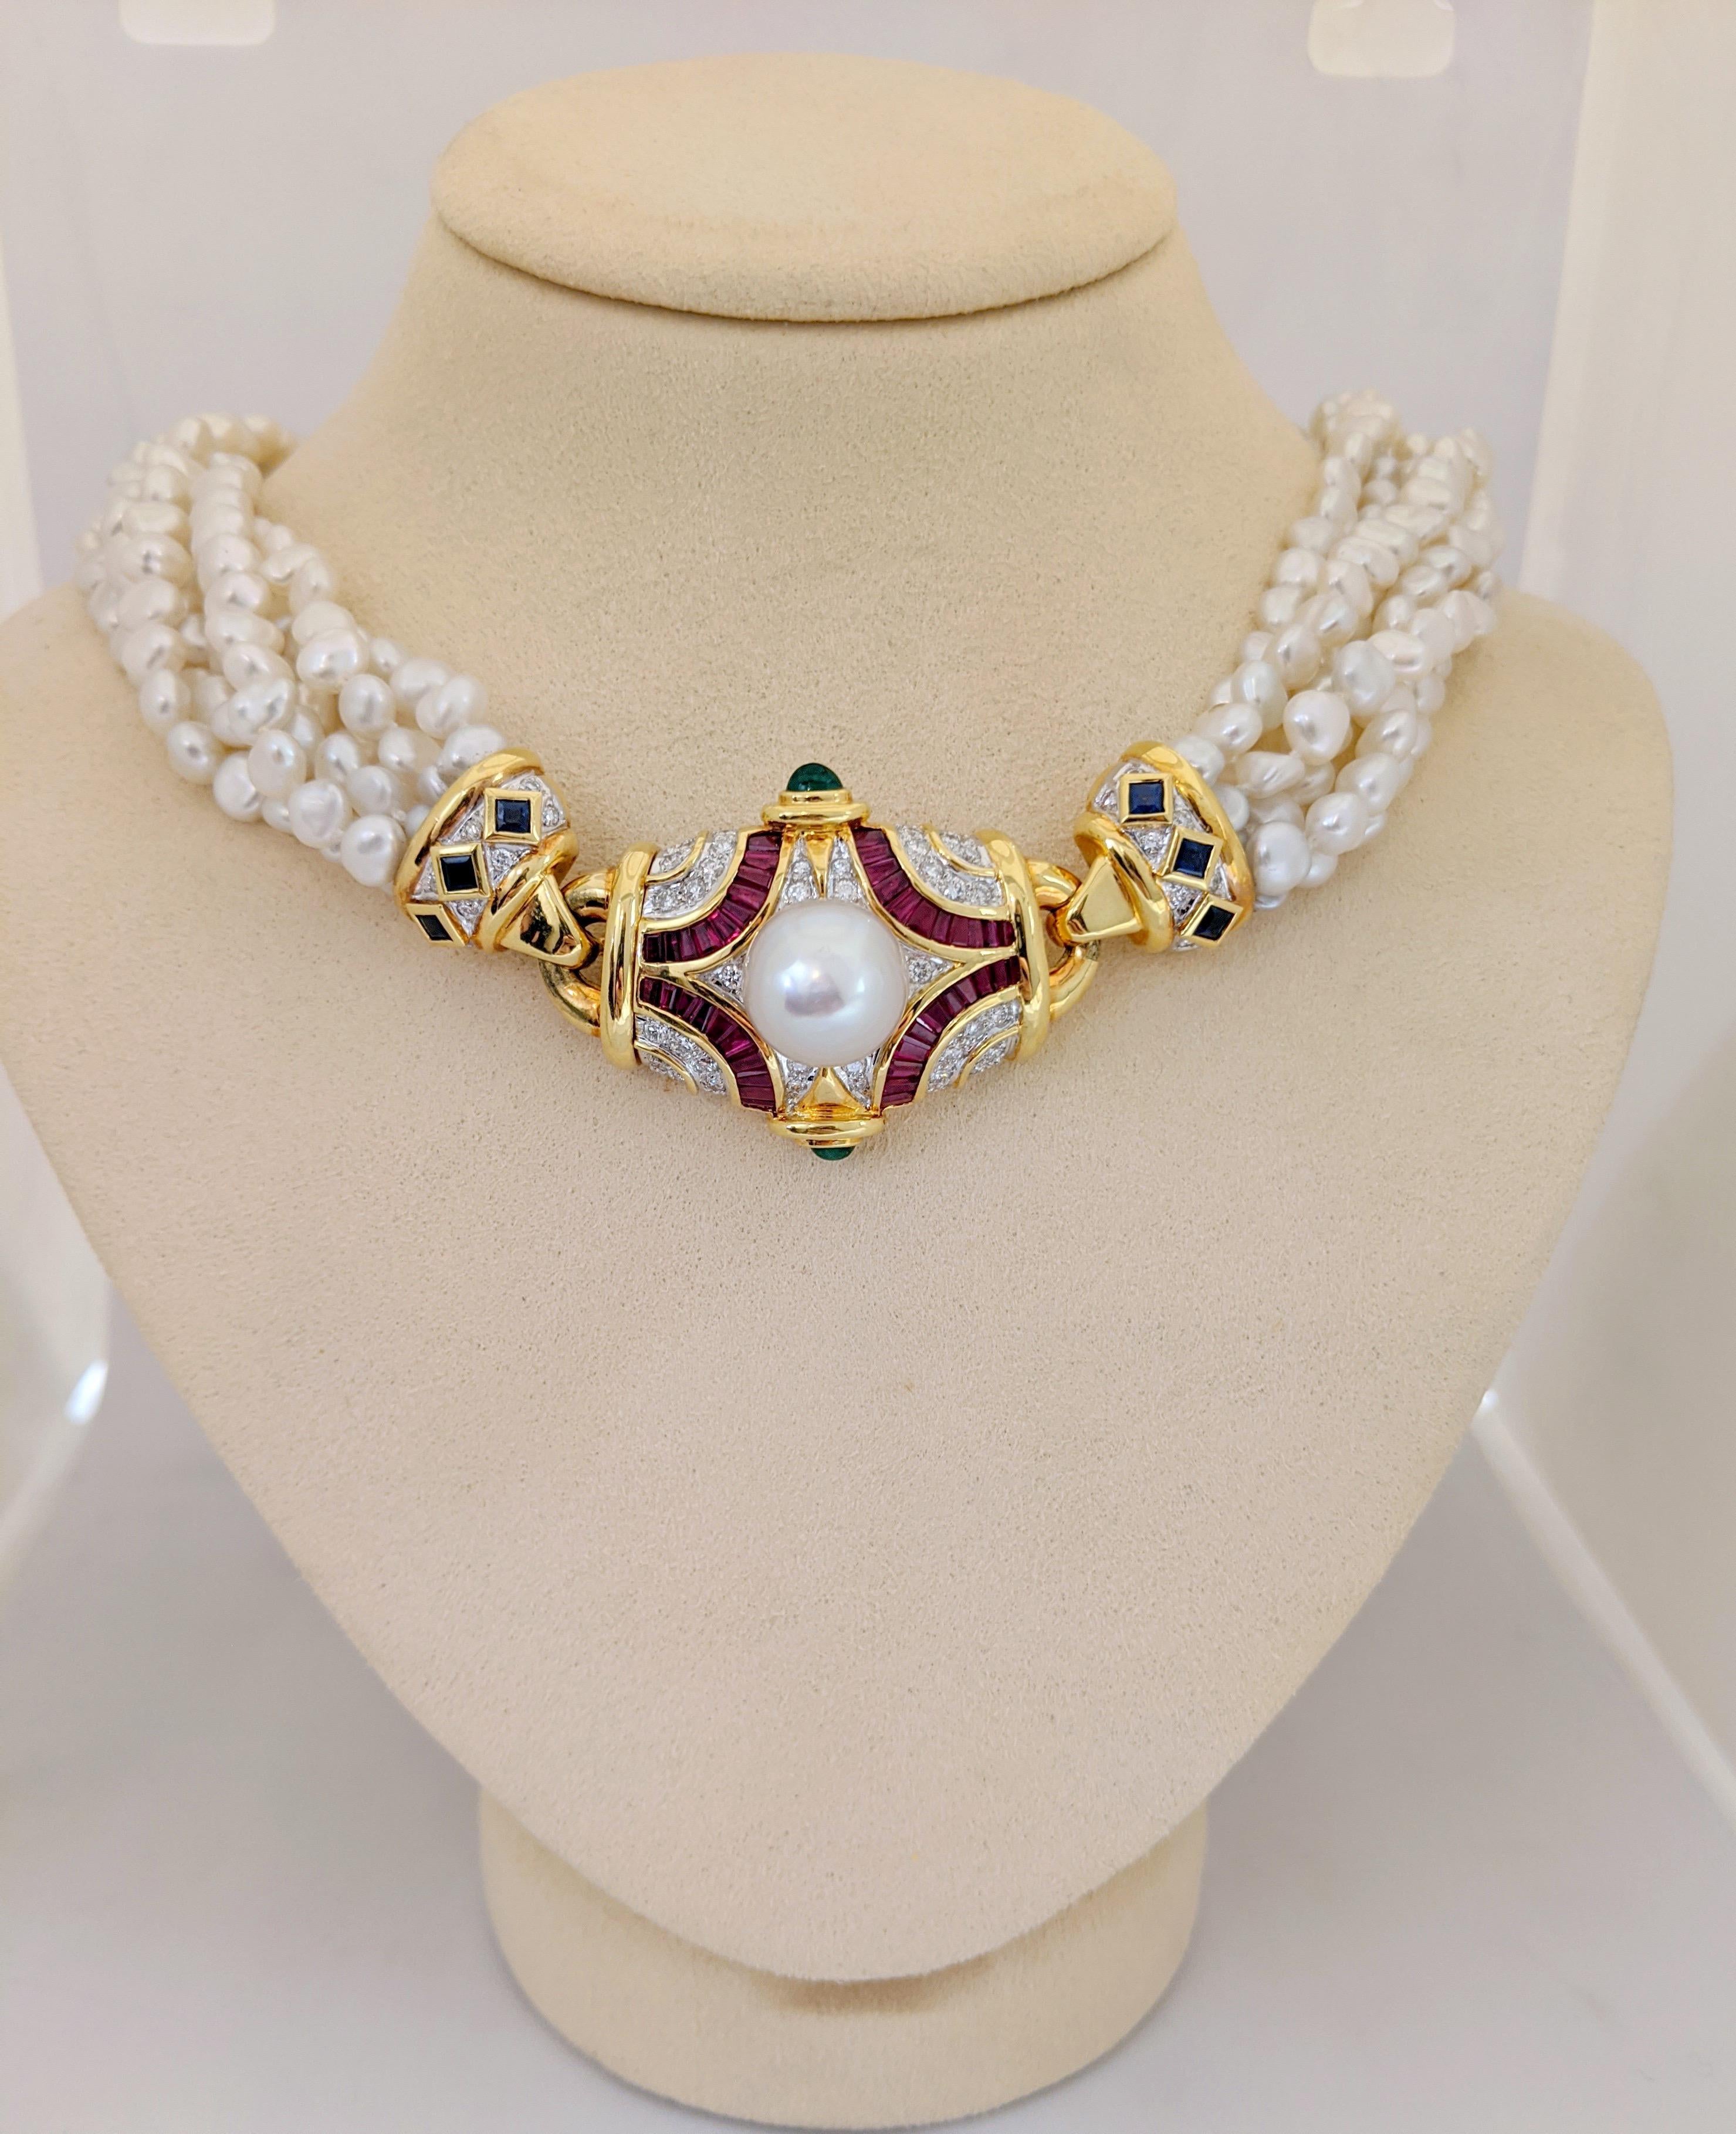 Retro Six Strand Pearl Necklace with Diamond, Ruby, Emerald, and Blue Sapphire Center For Sale